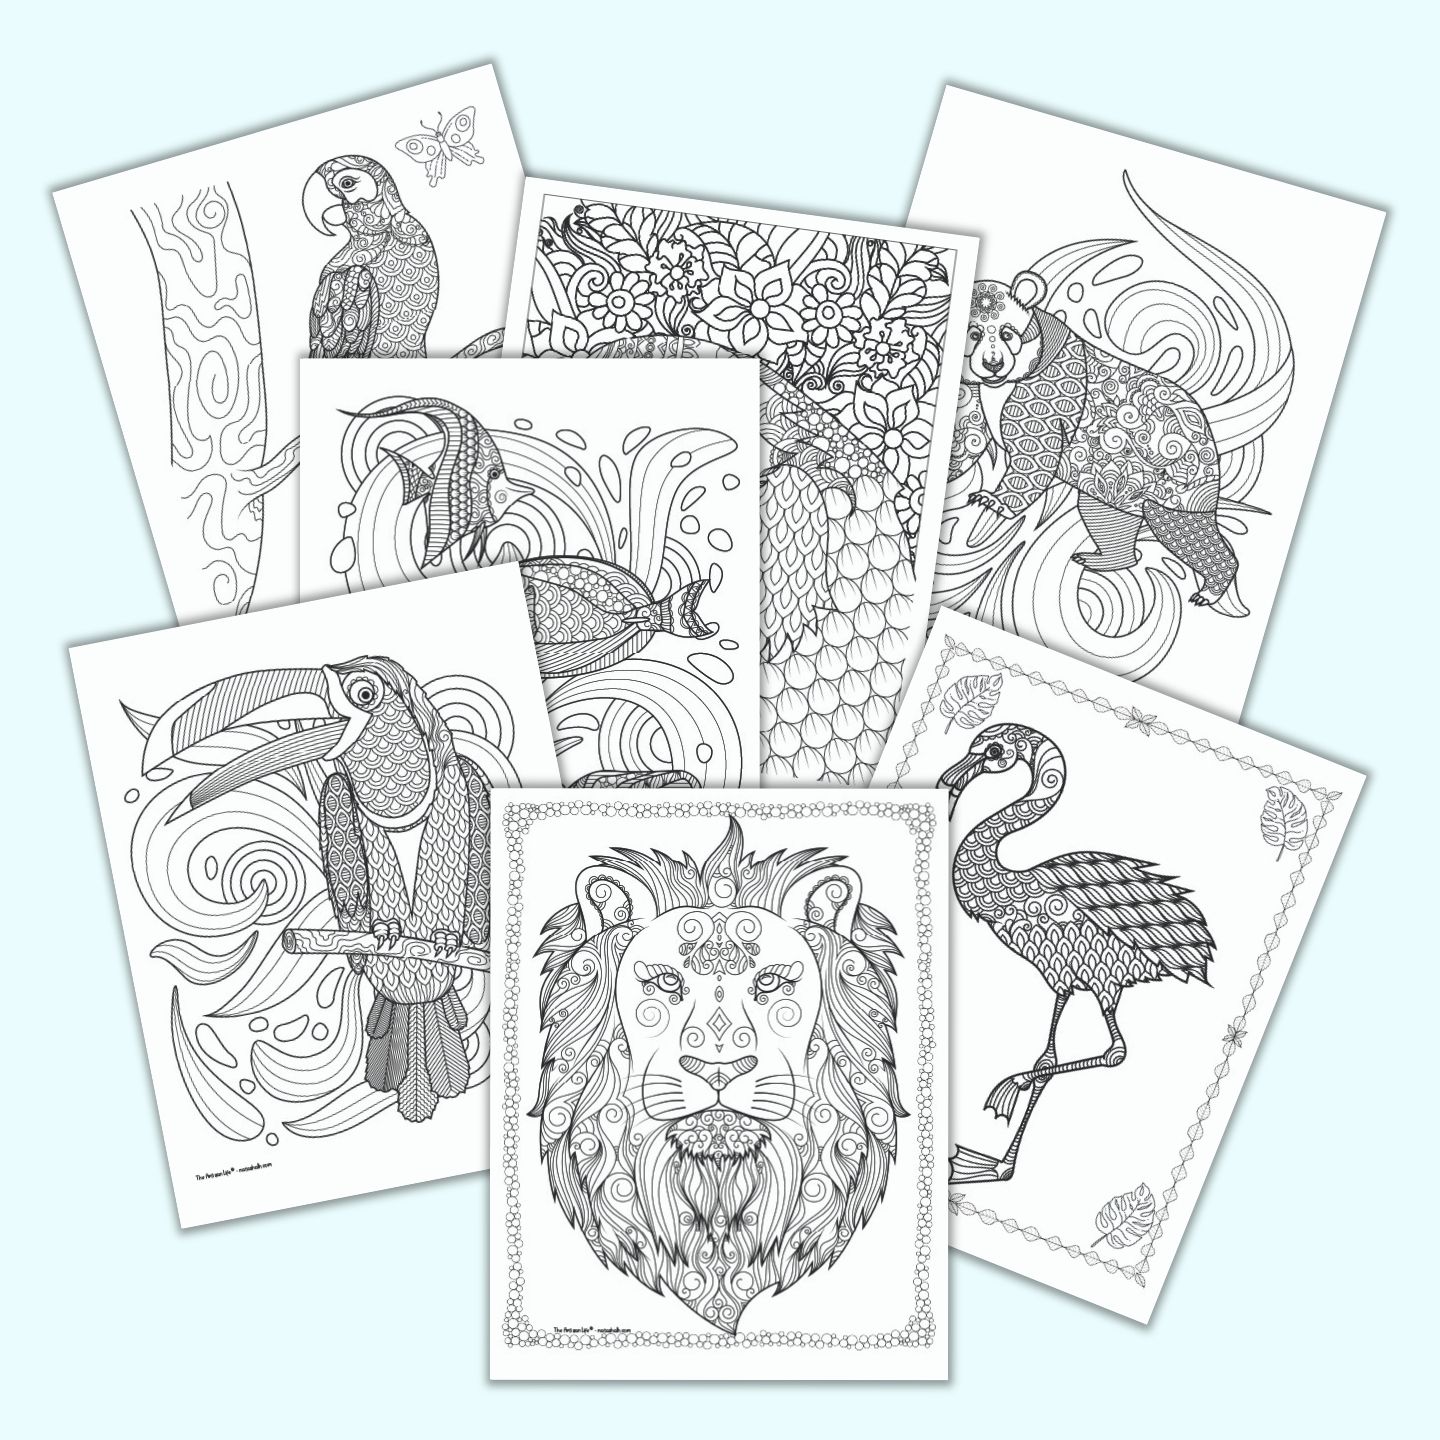 21 Free Animal Coloring Pages for Adults   The Artisan Life